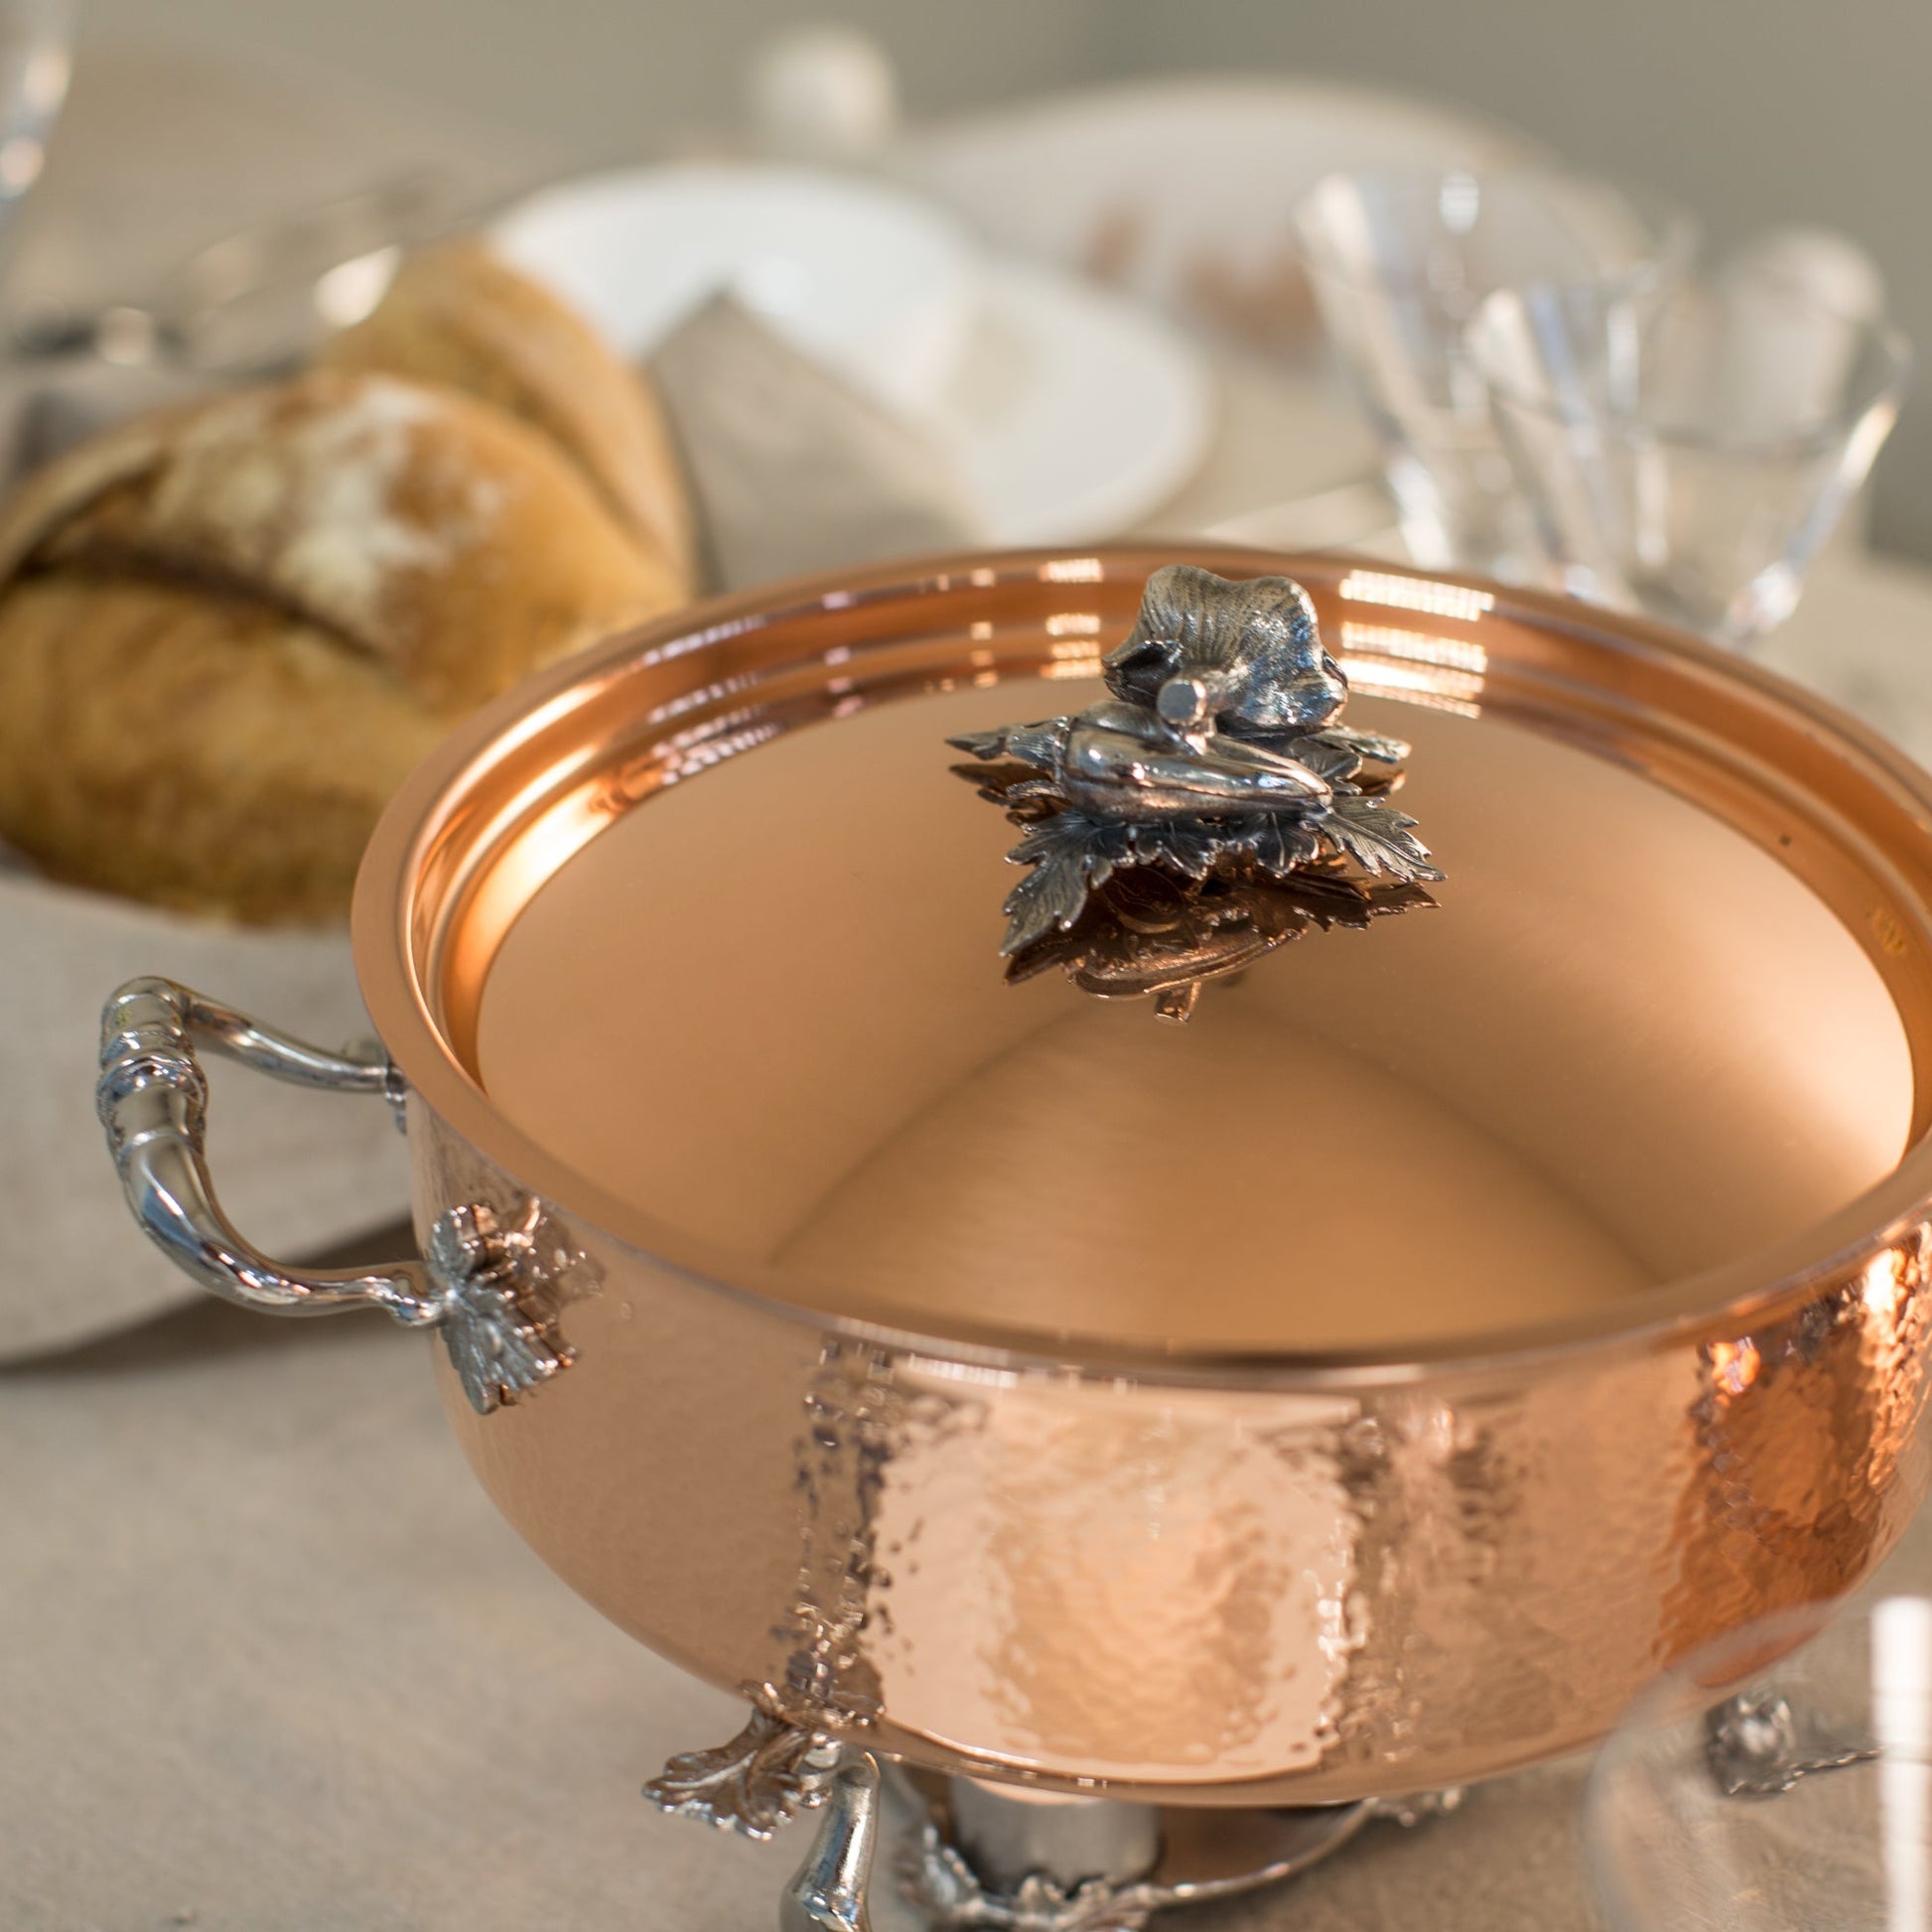 Braiser with lid in hammered copper from Ruffoni